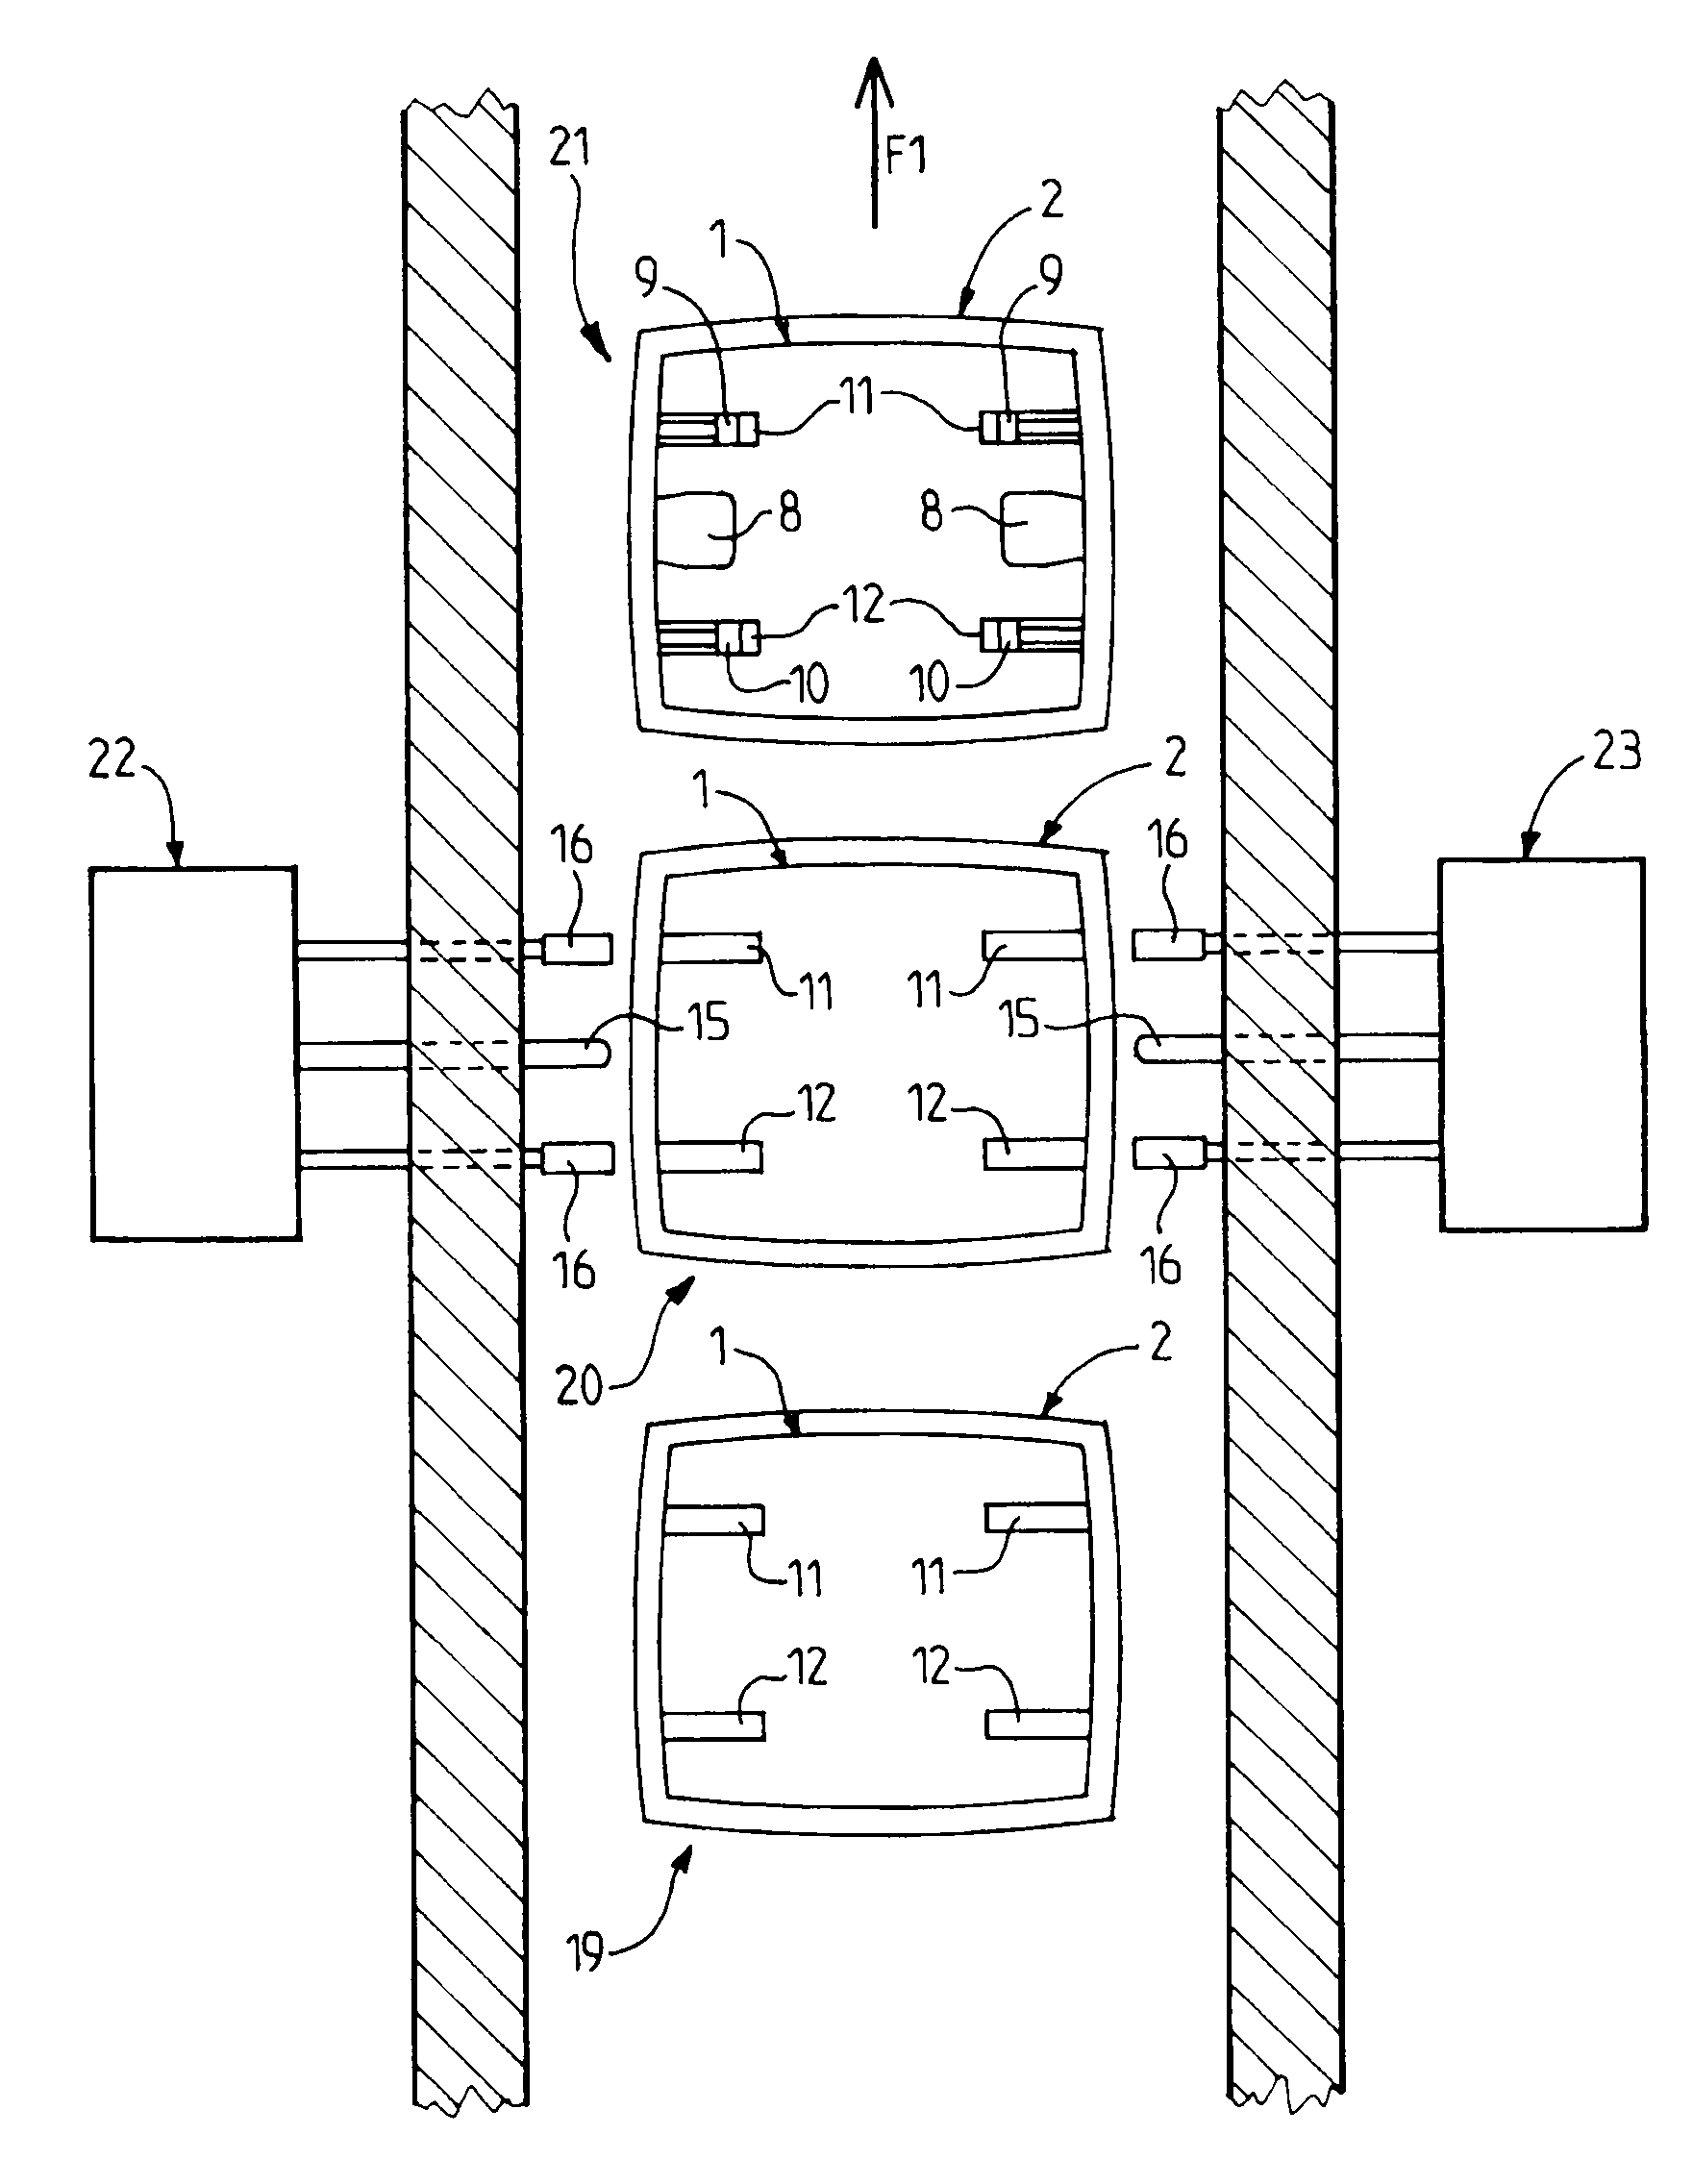 Device for gravity-bending glass on several support moulds with controlled transition between moulds